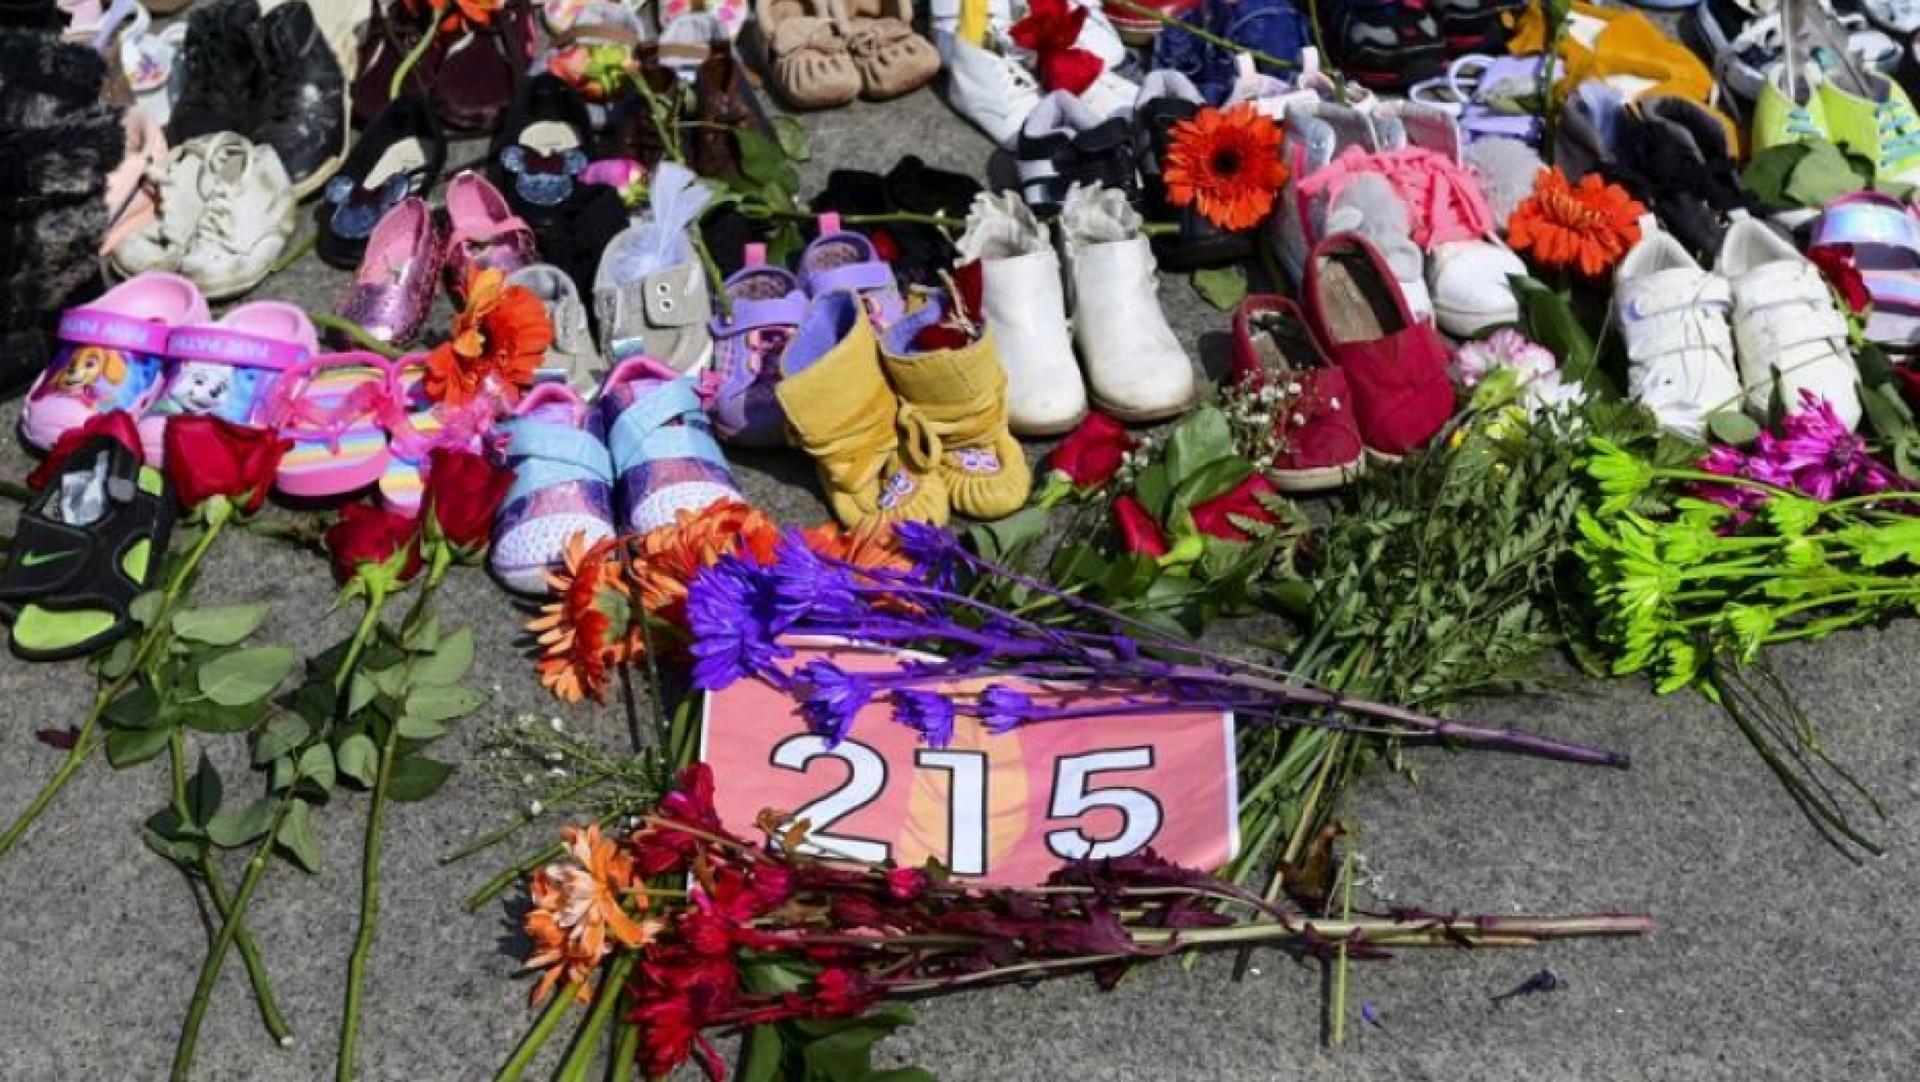 Flowers, children's shoes and other items rest at a memorial at the Eternal Flame on Parliament Hill in Ottawa